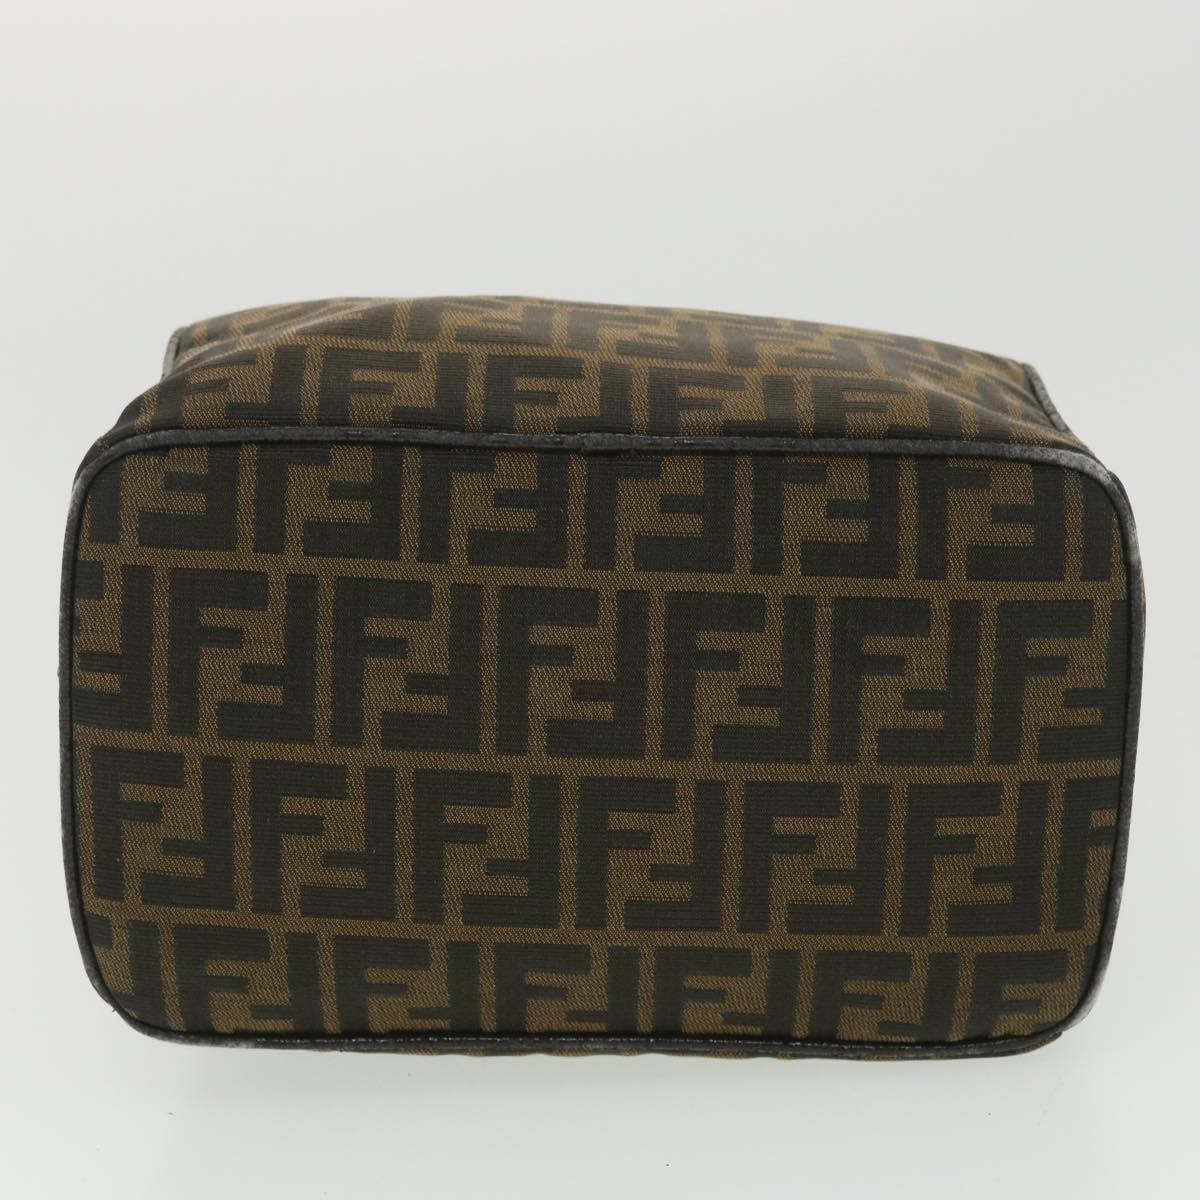 FENDI Zucca Canvas Vanity Cosmetic Pouch Black Brown Auth 37617